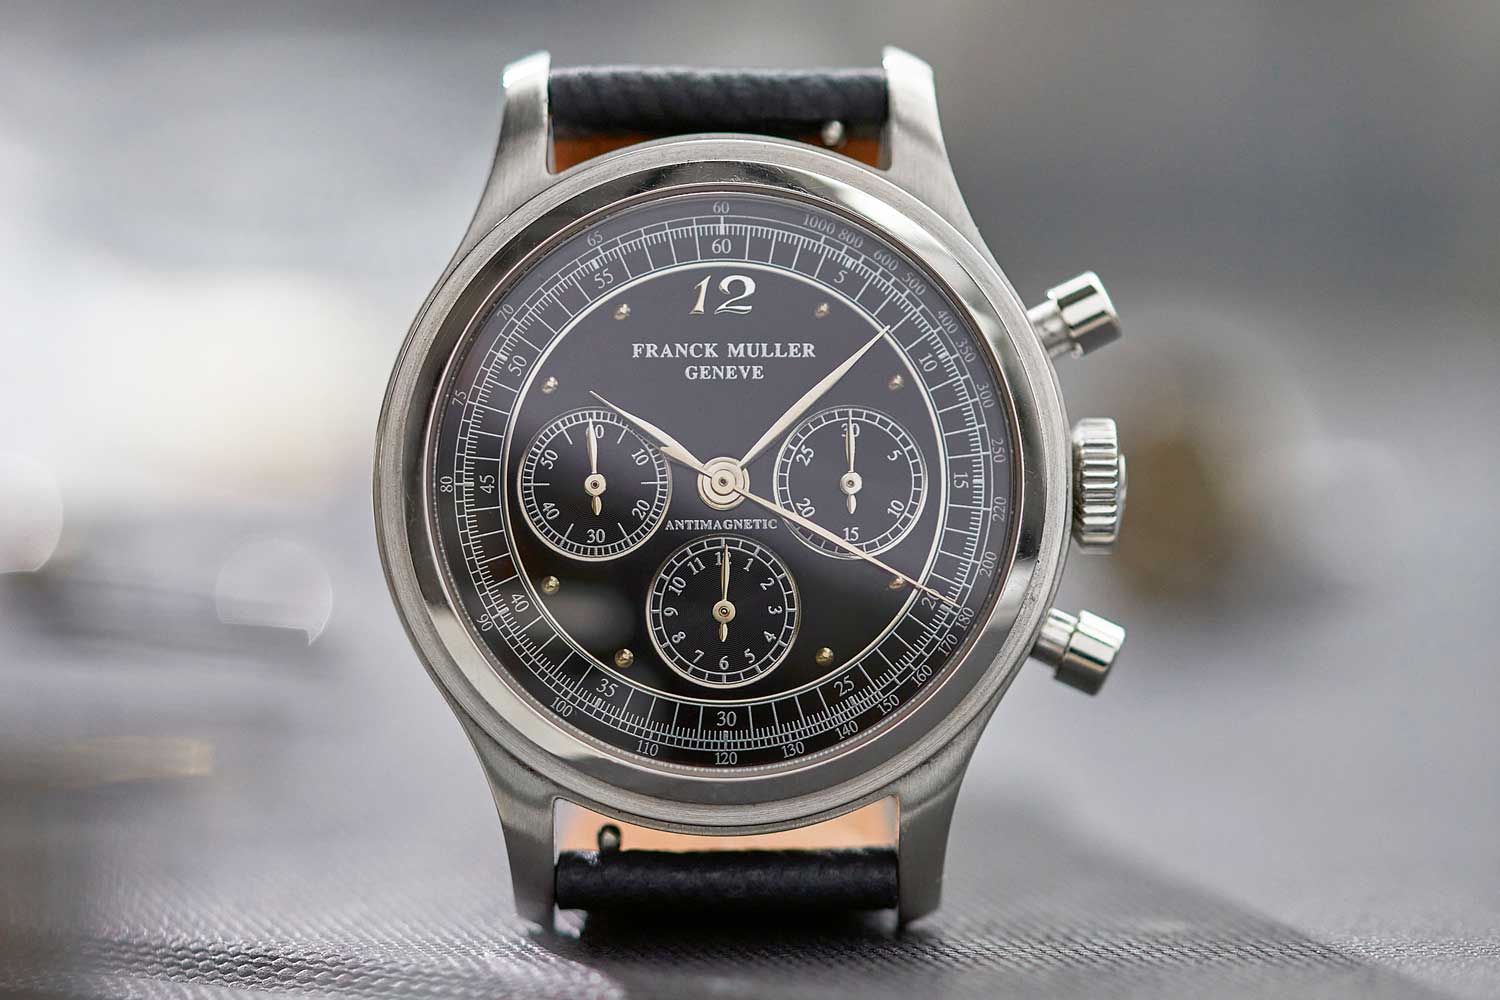 The decidedly under the radar Franck Muller Lemania 1874 Chronograph from the 1990s (Image: A Collected Man)